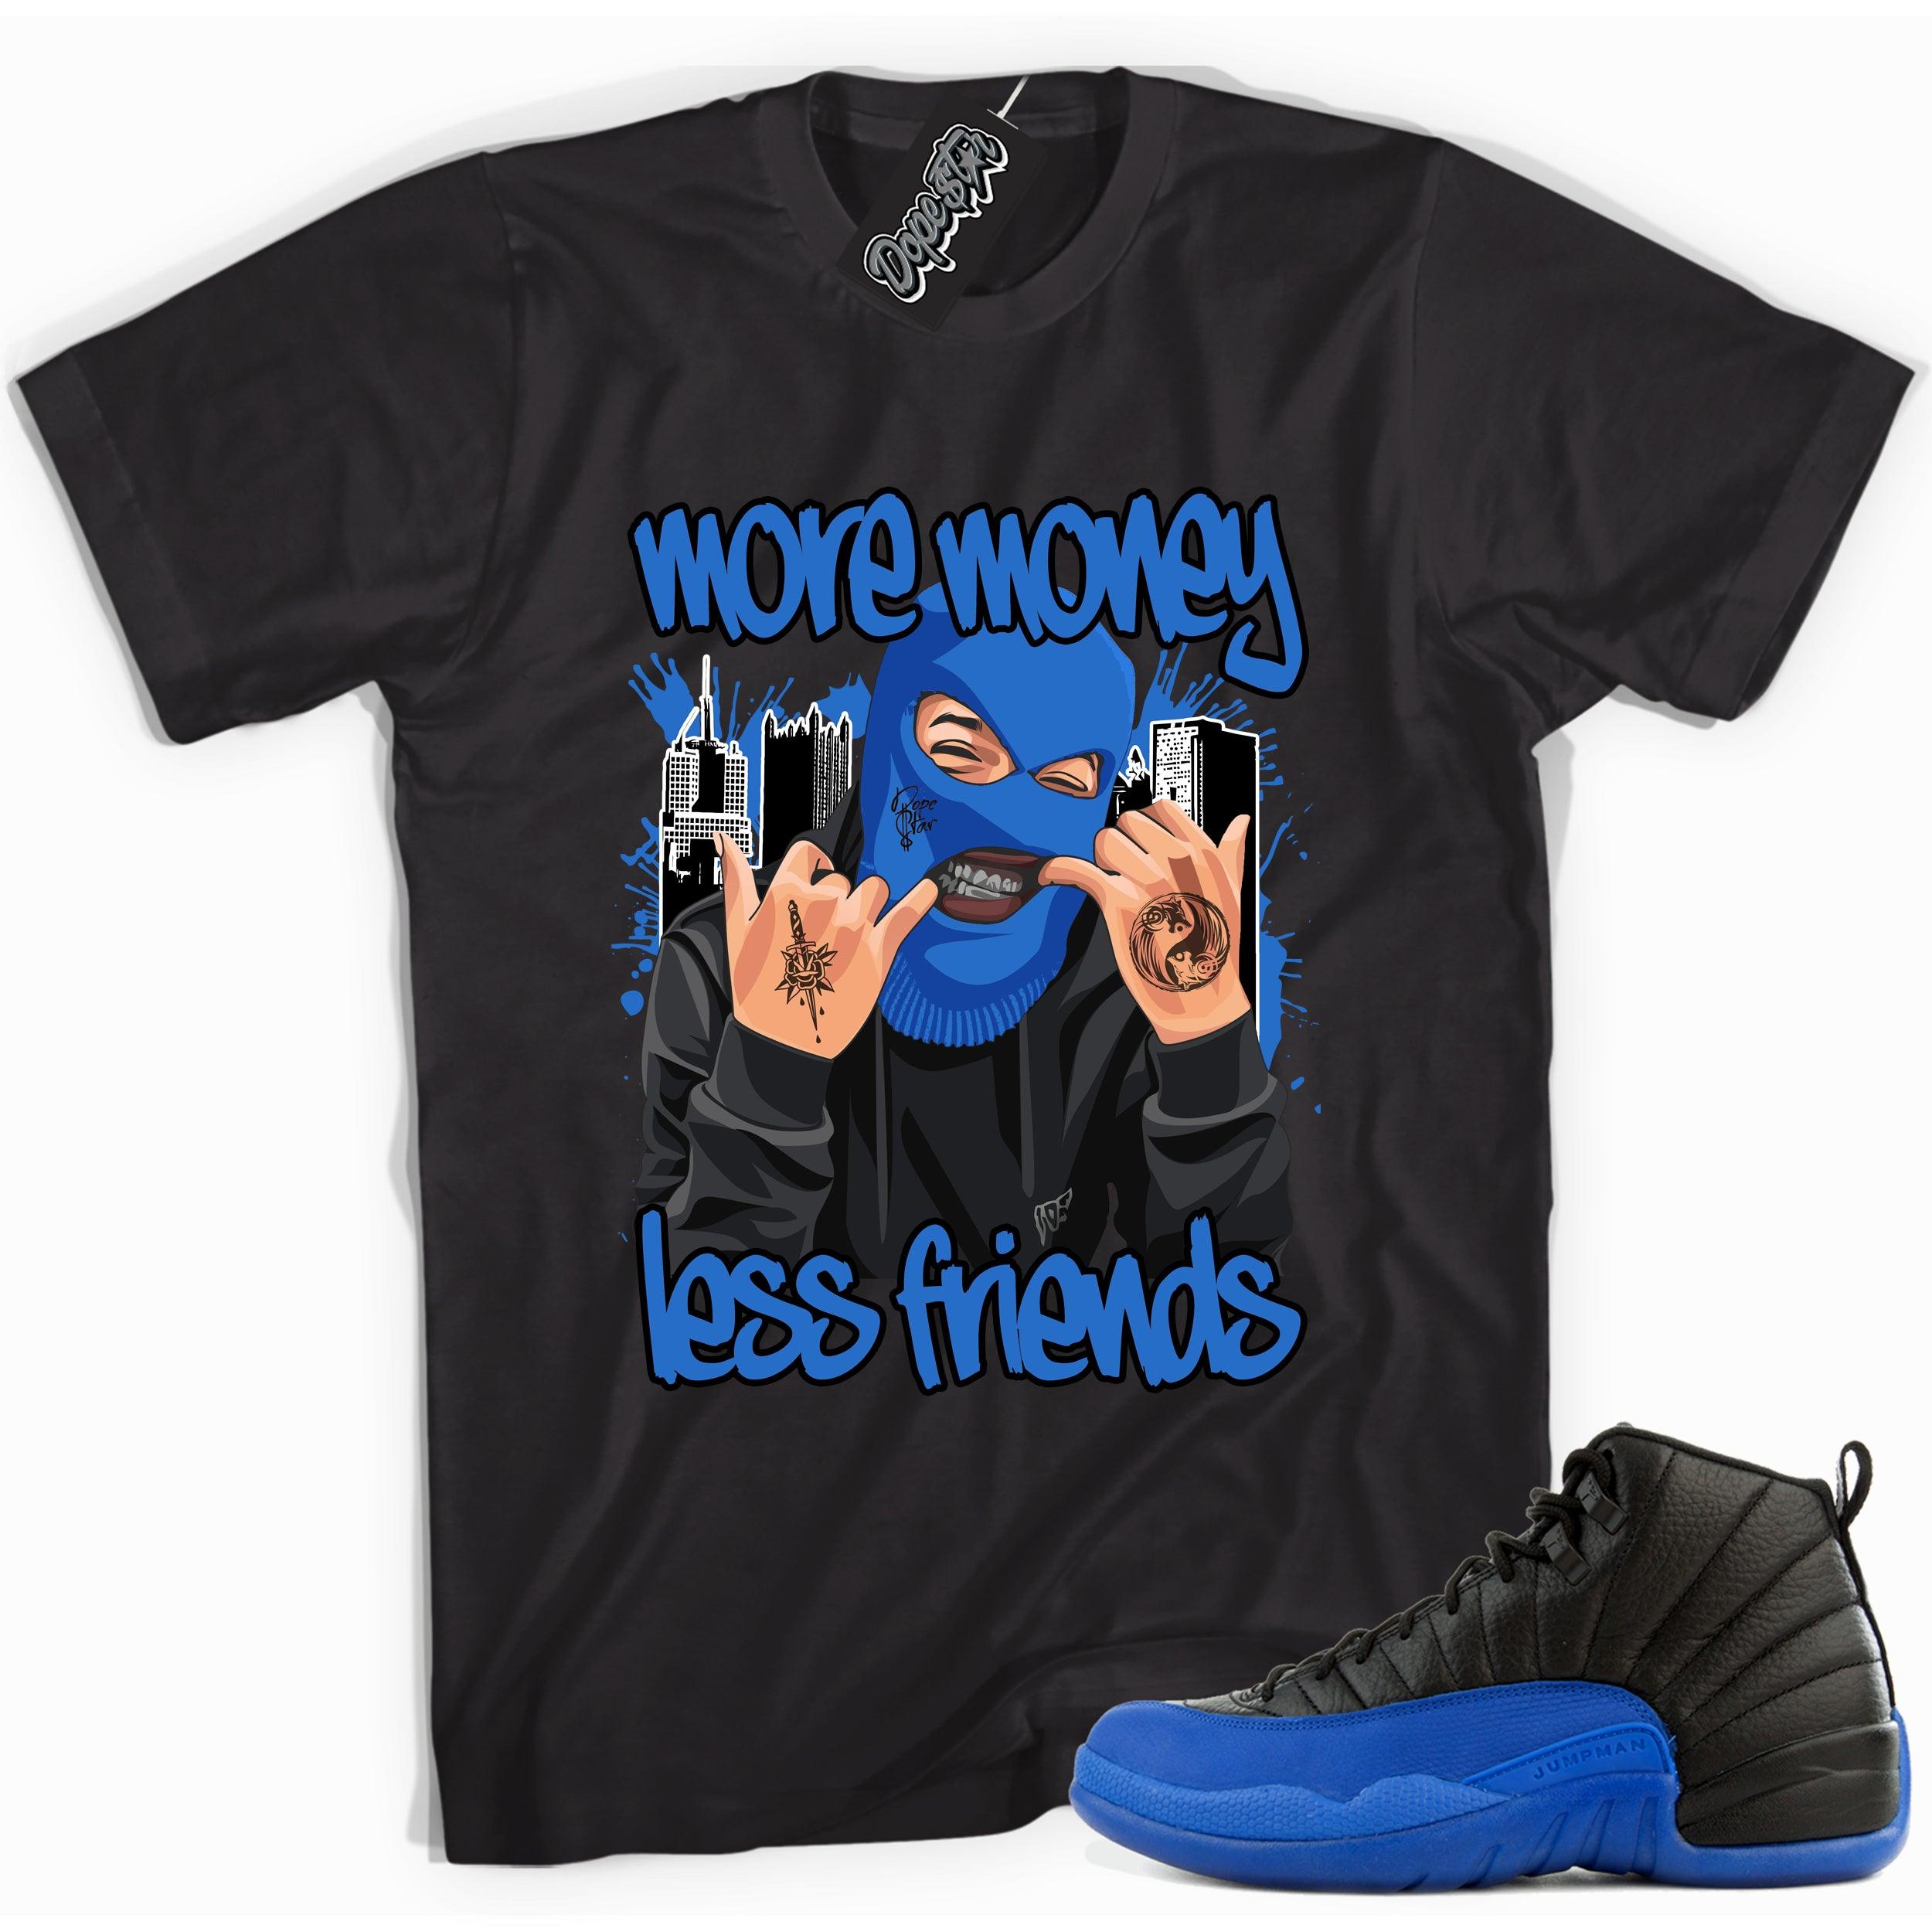 Cool black graphic tee with 'more money less friends' print, that perfectly matches  Air Jordan 12 Retro Black Game Royal sneakers.